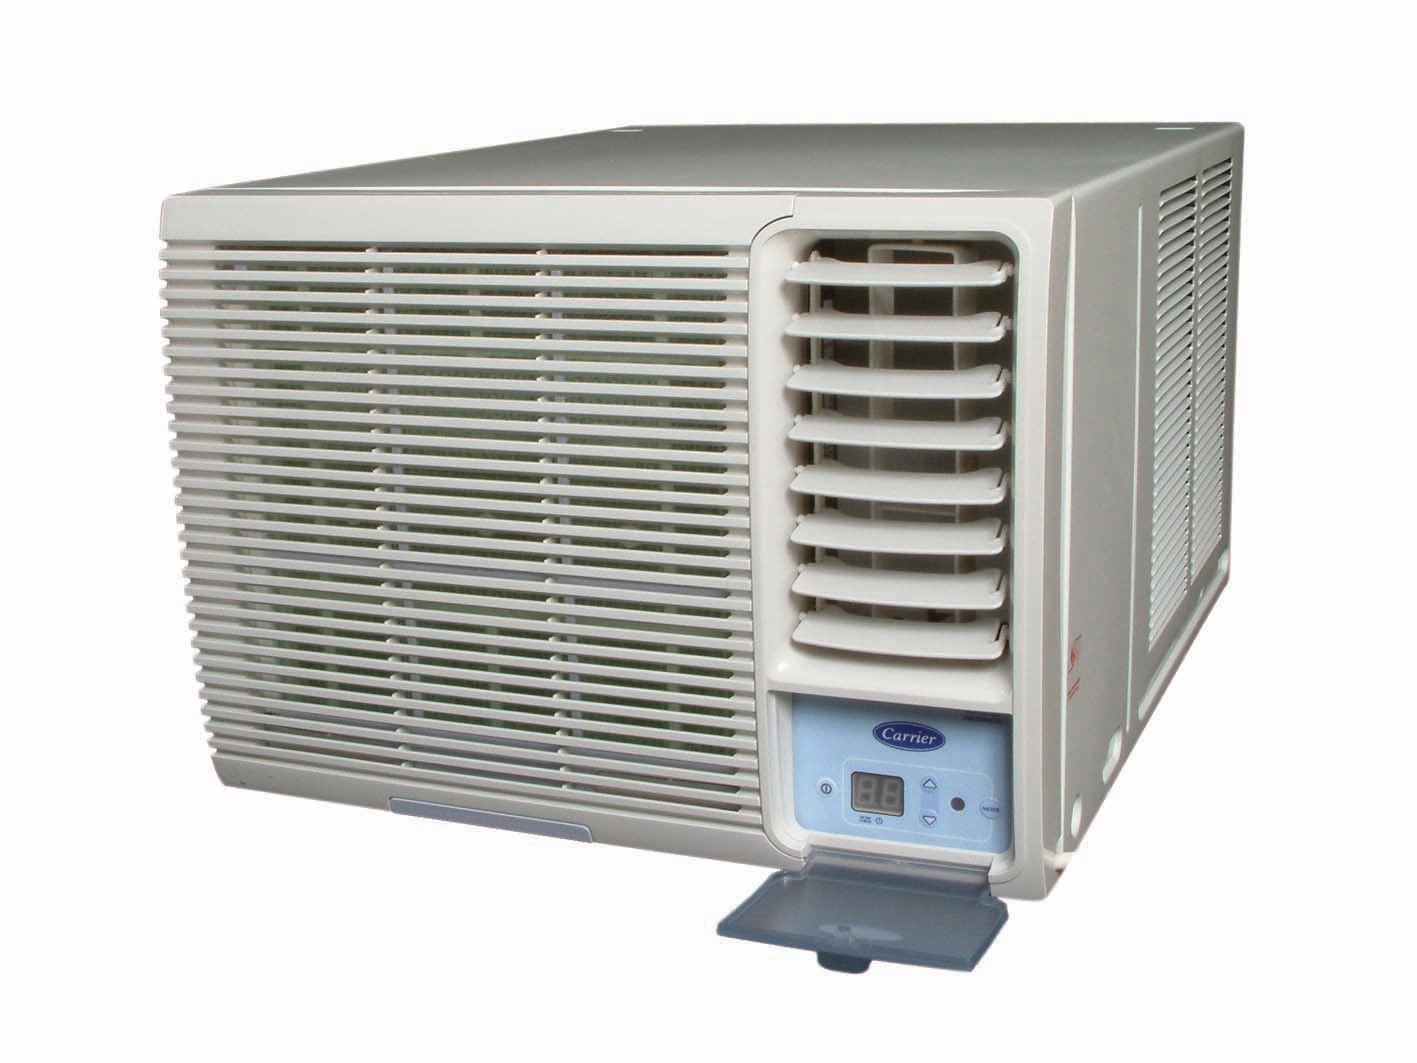 Carrier Brand 1.0 ton window type AC large image 0